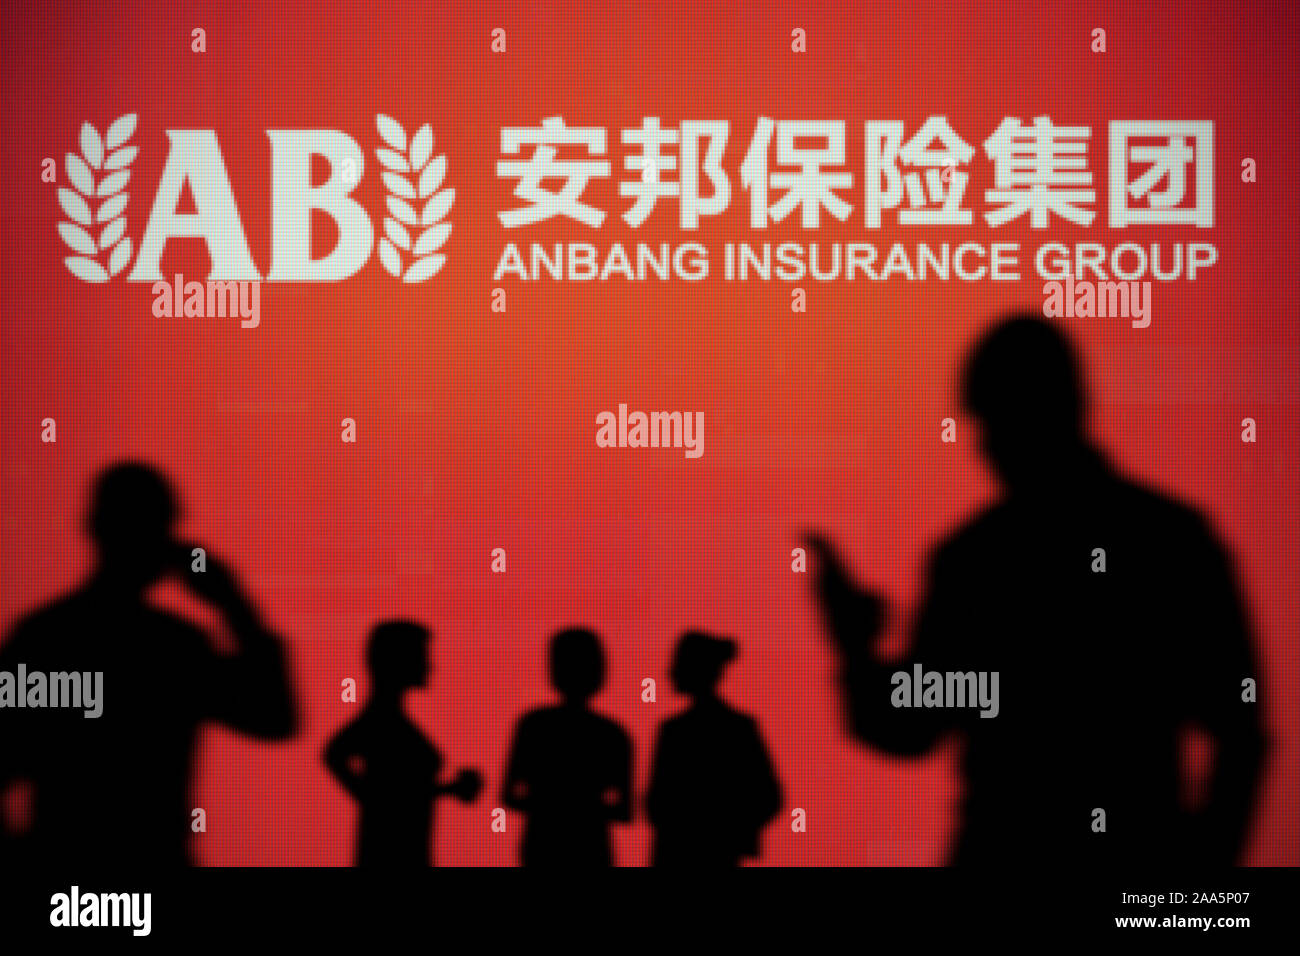 The Anbang Insurance Group logo is seen on an LED screen in the background while a silhouetted person uses a smartphone (Editorial use only) Stock Photo